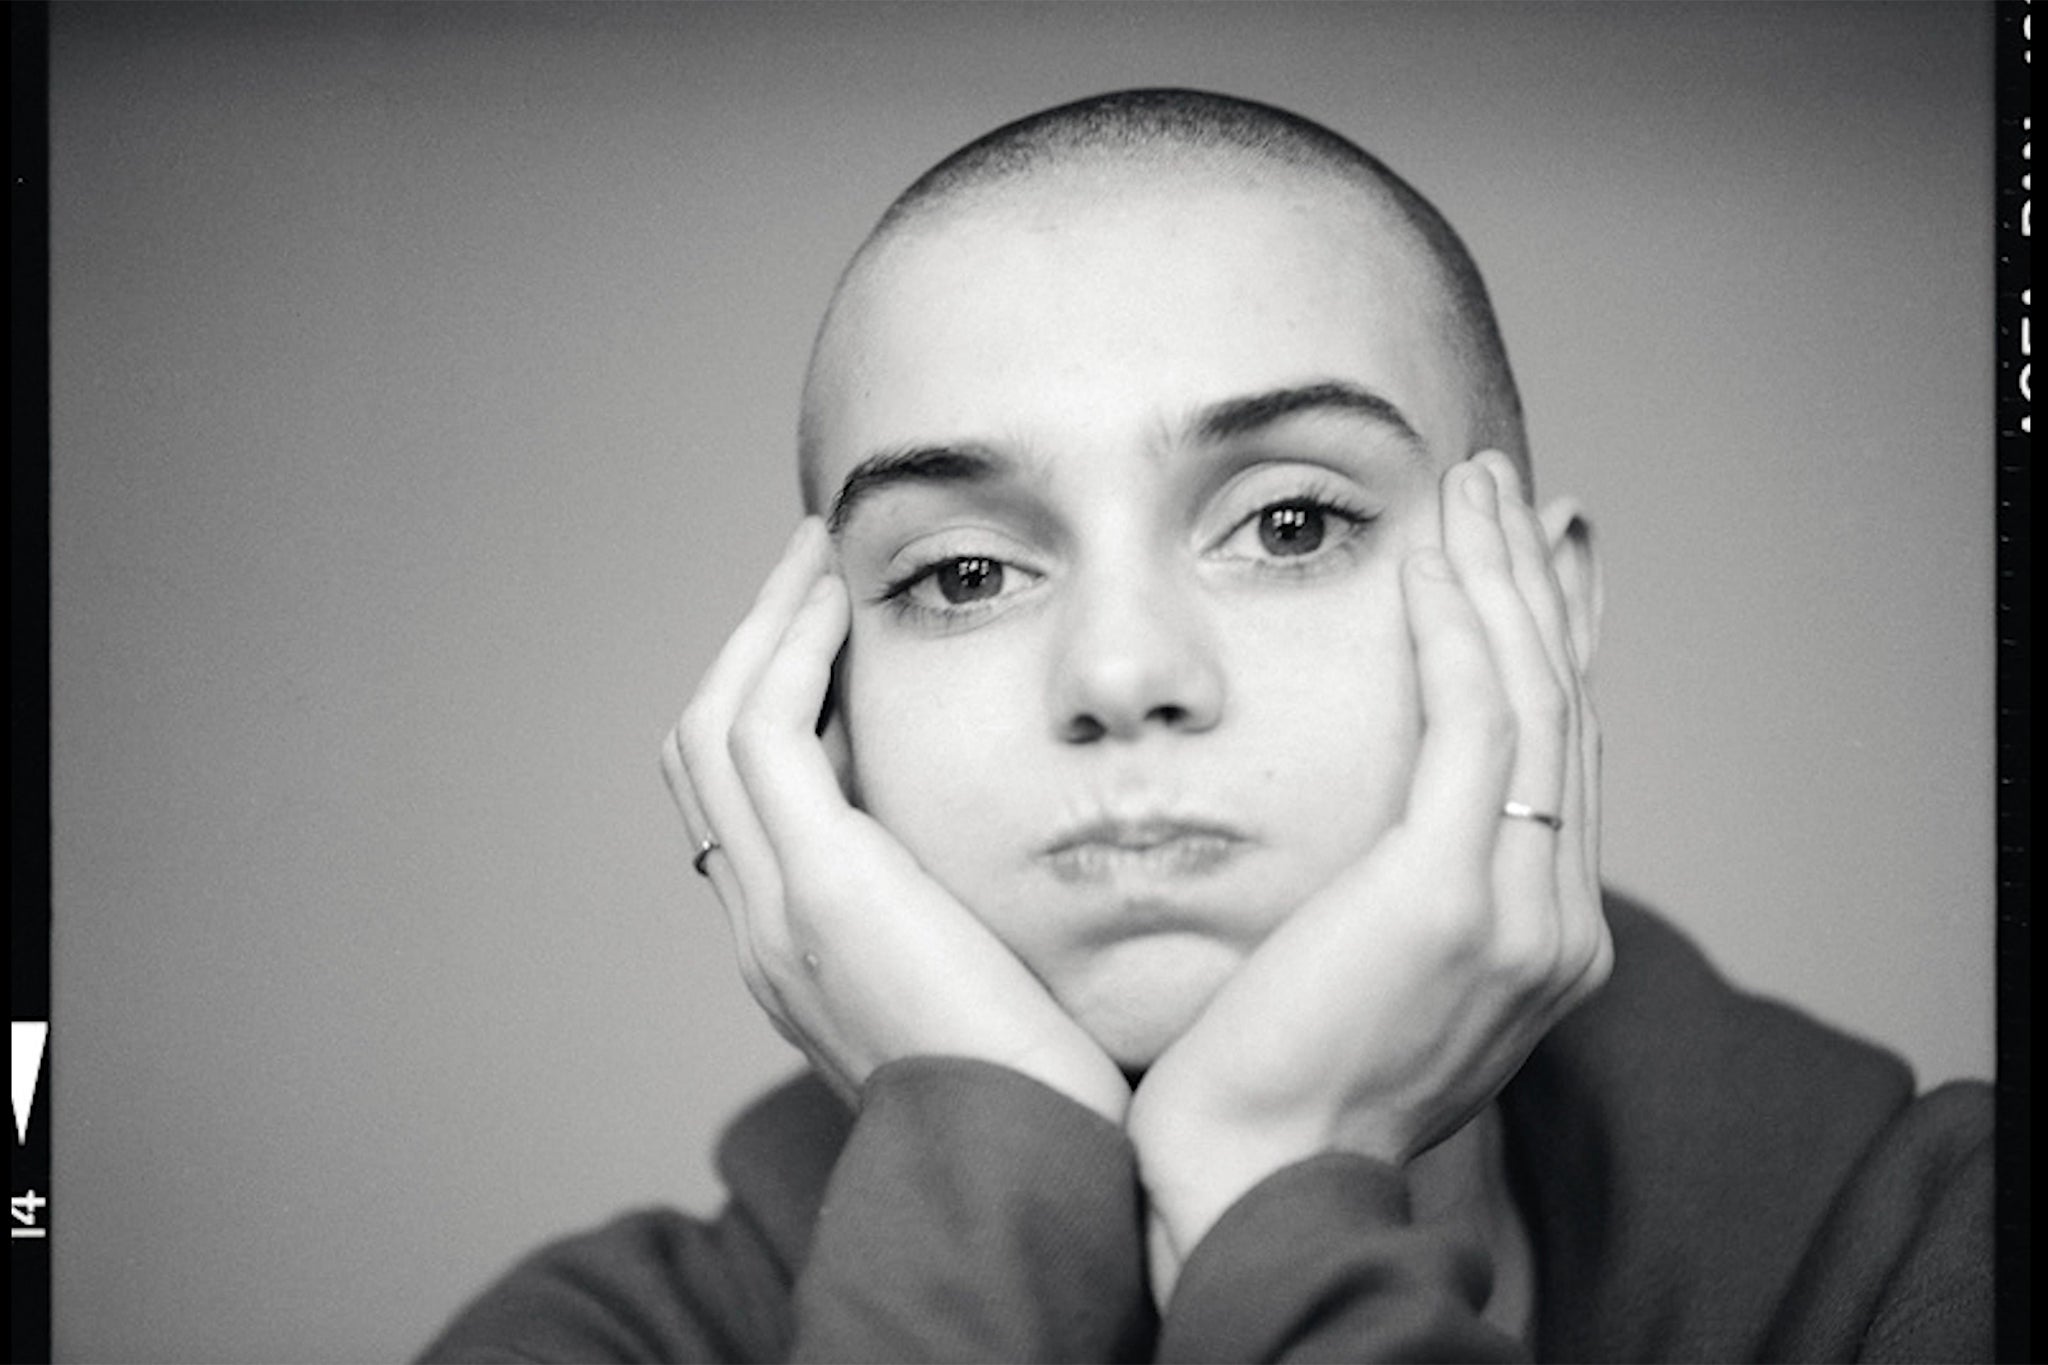 Sinead O’Connor photographed in 1988